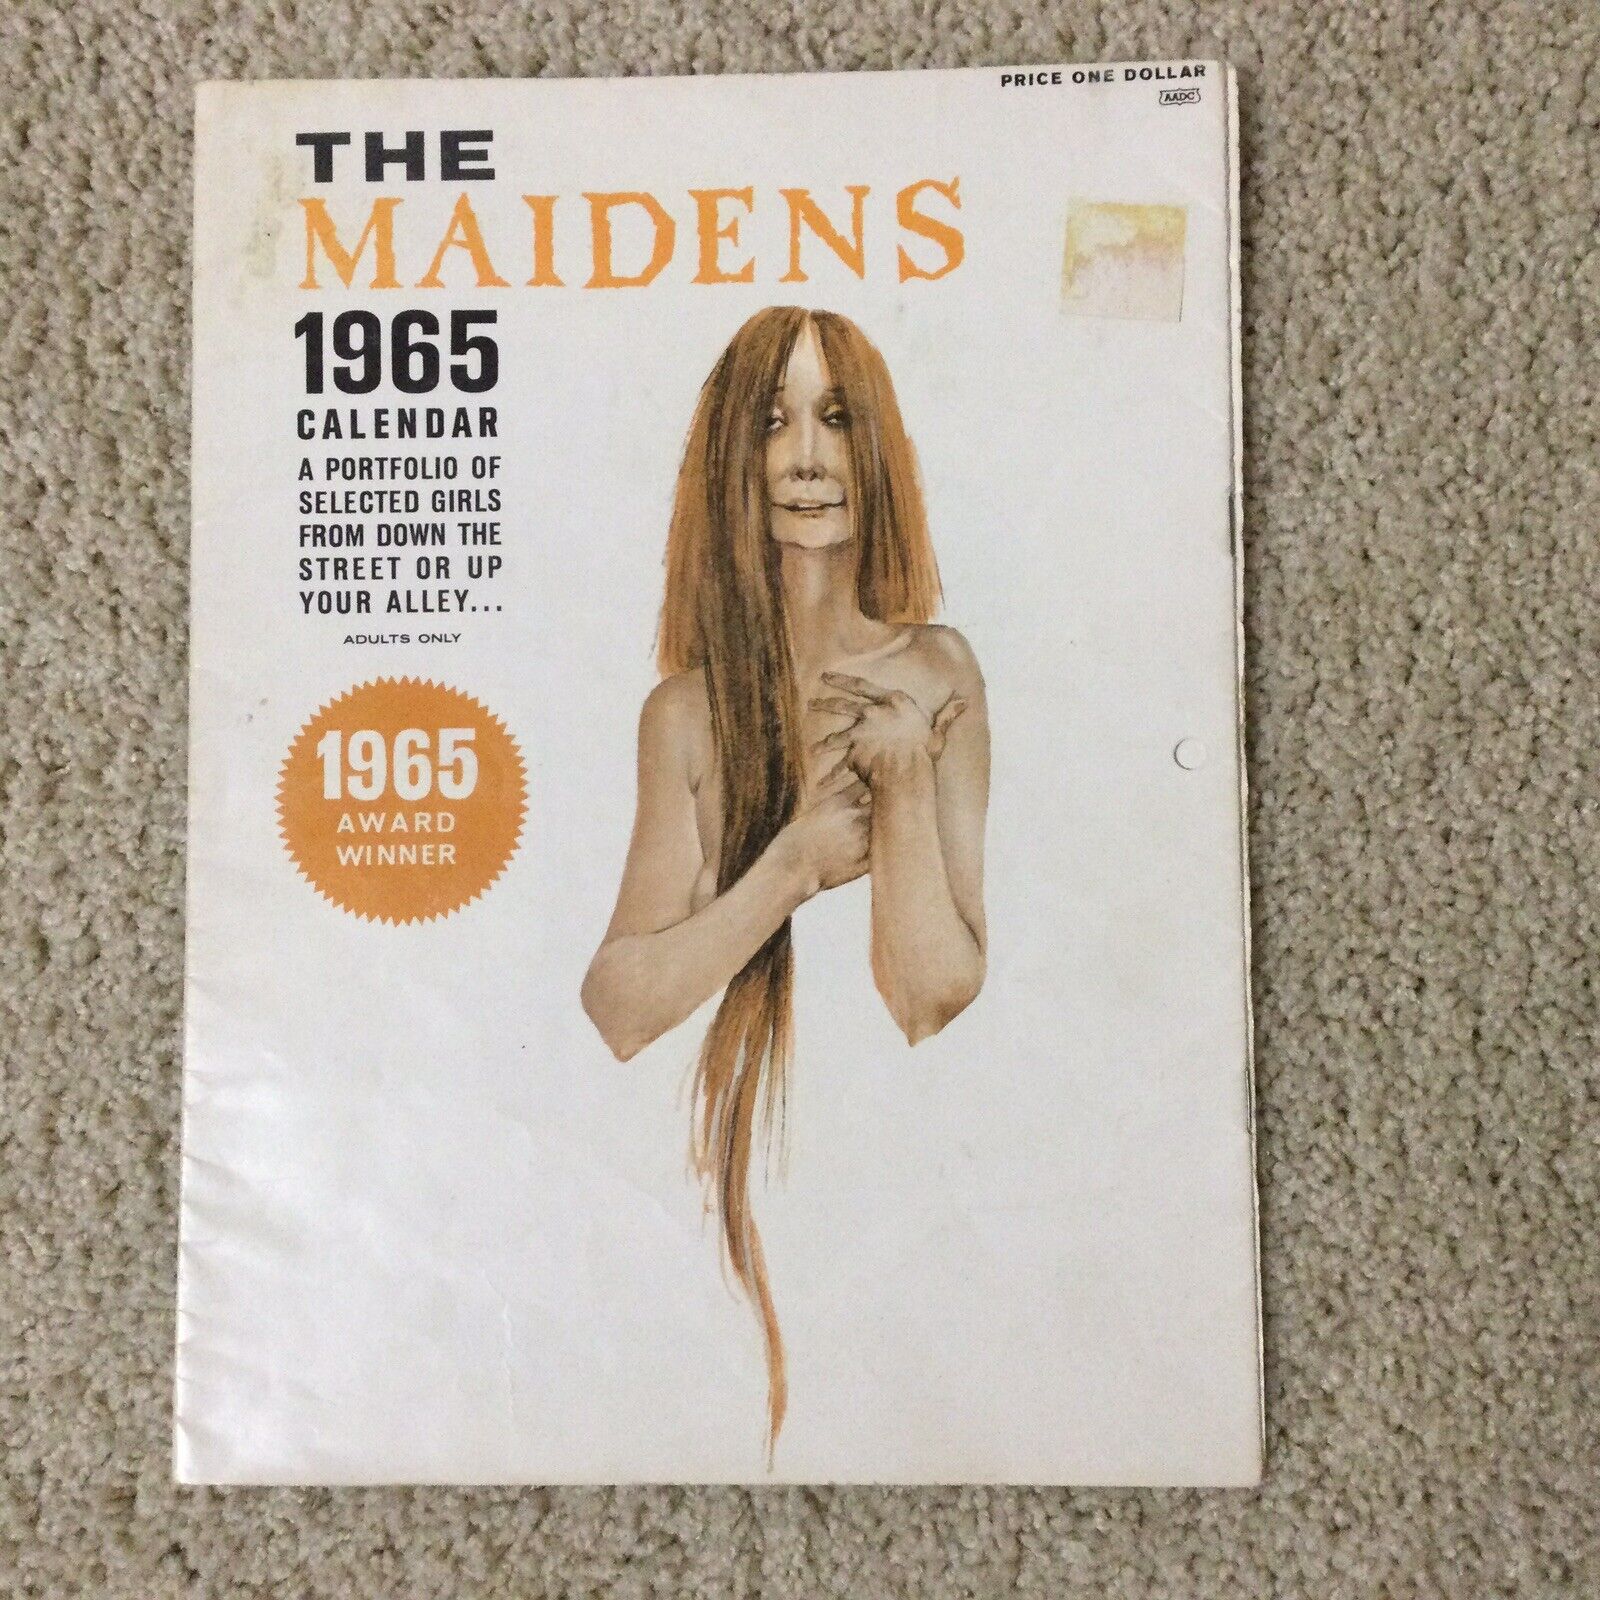 THE MAIDENS 1965 CALENDAR HUMOROUS PINUP ART SELECT GIRLS FROM DOWN STREET NUDES